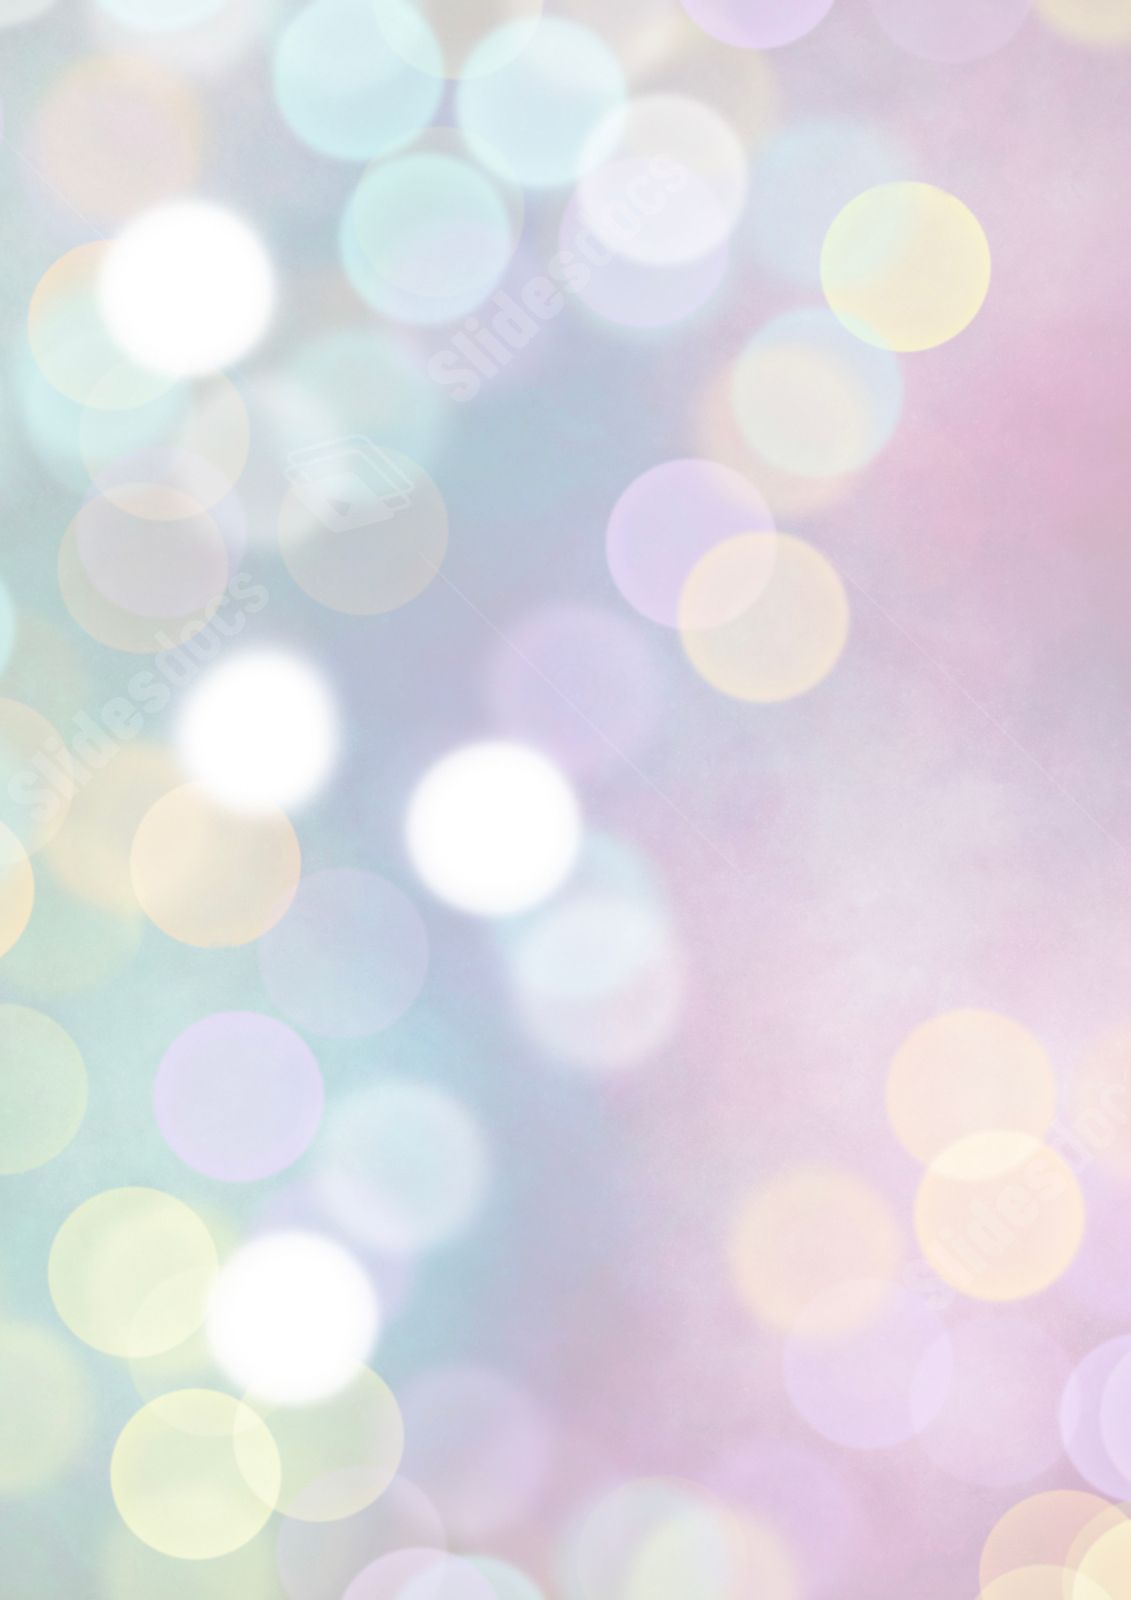 Bokeh background image with a pastel color palette - Border